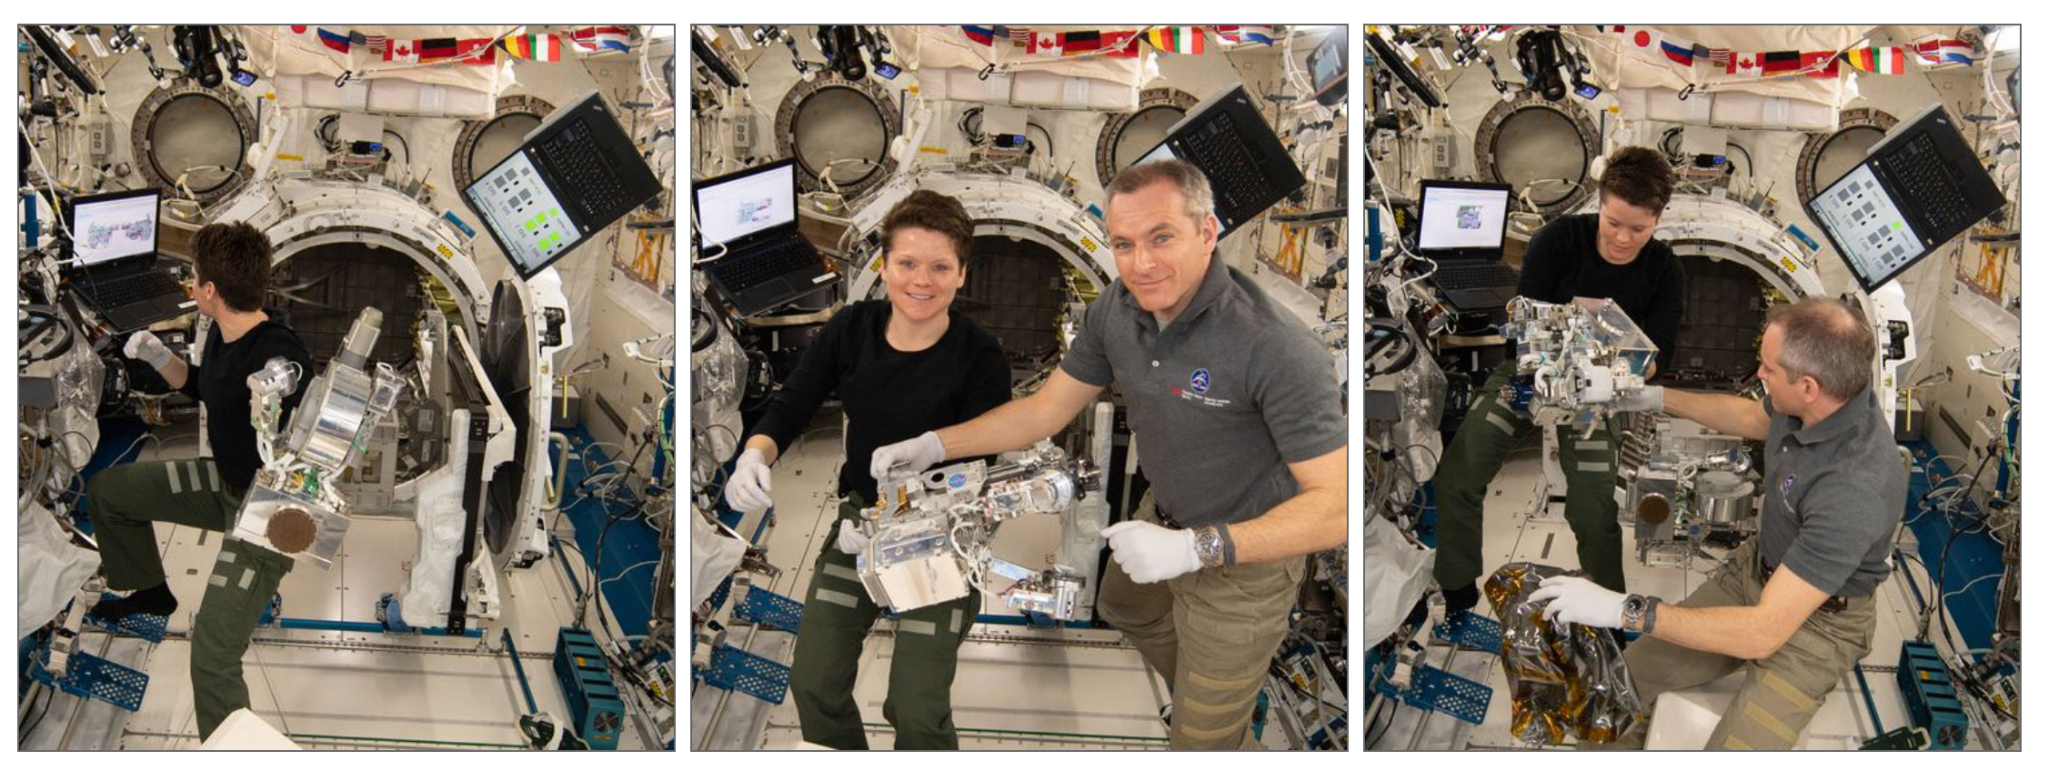 During ground testing astronauts Anne McClain and David Saint-Jacques pose with the corresponding RRM3 tools aboard the International Space Station.